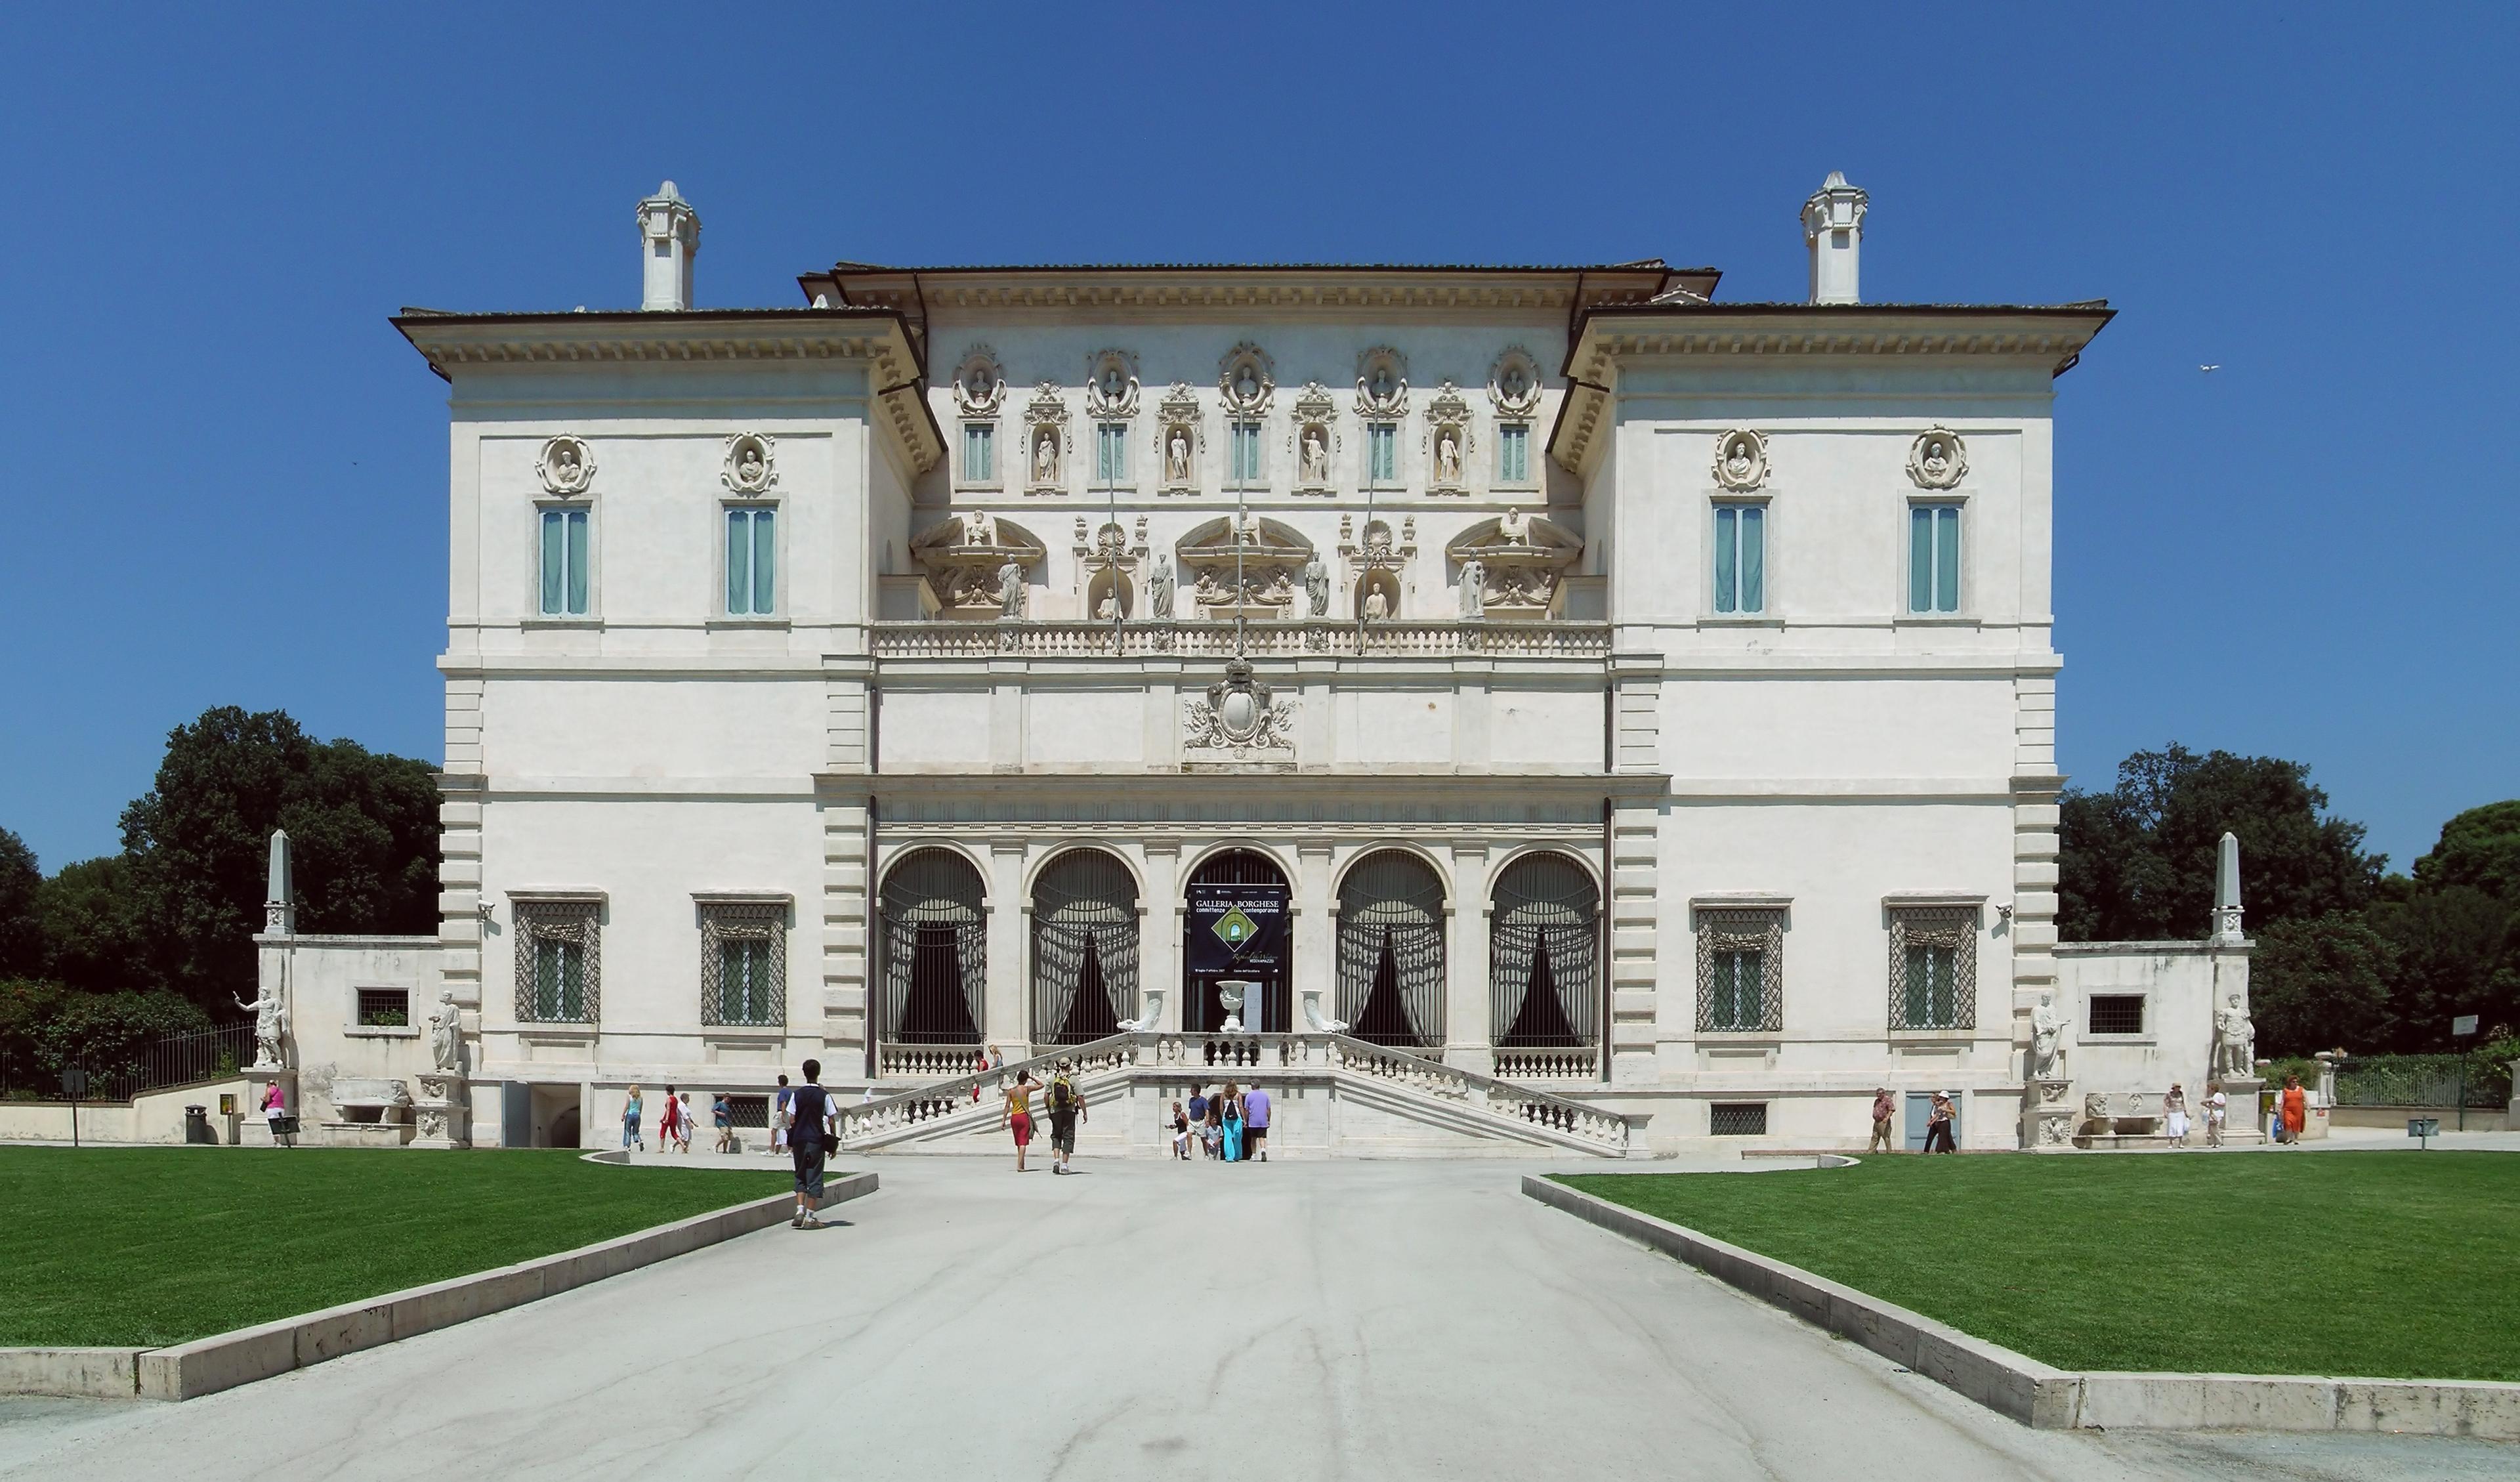 Cover image of this place Galleria Borghese